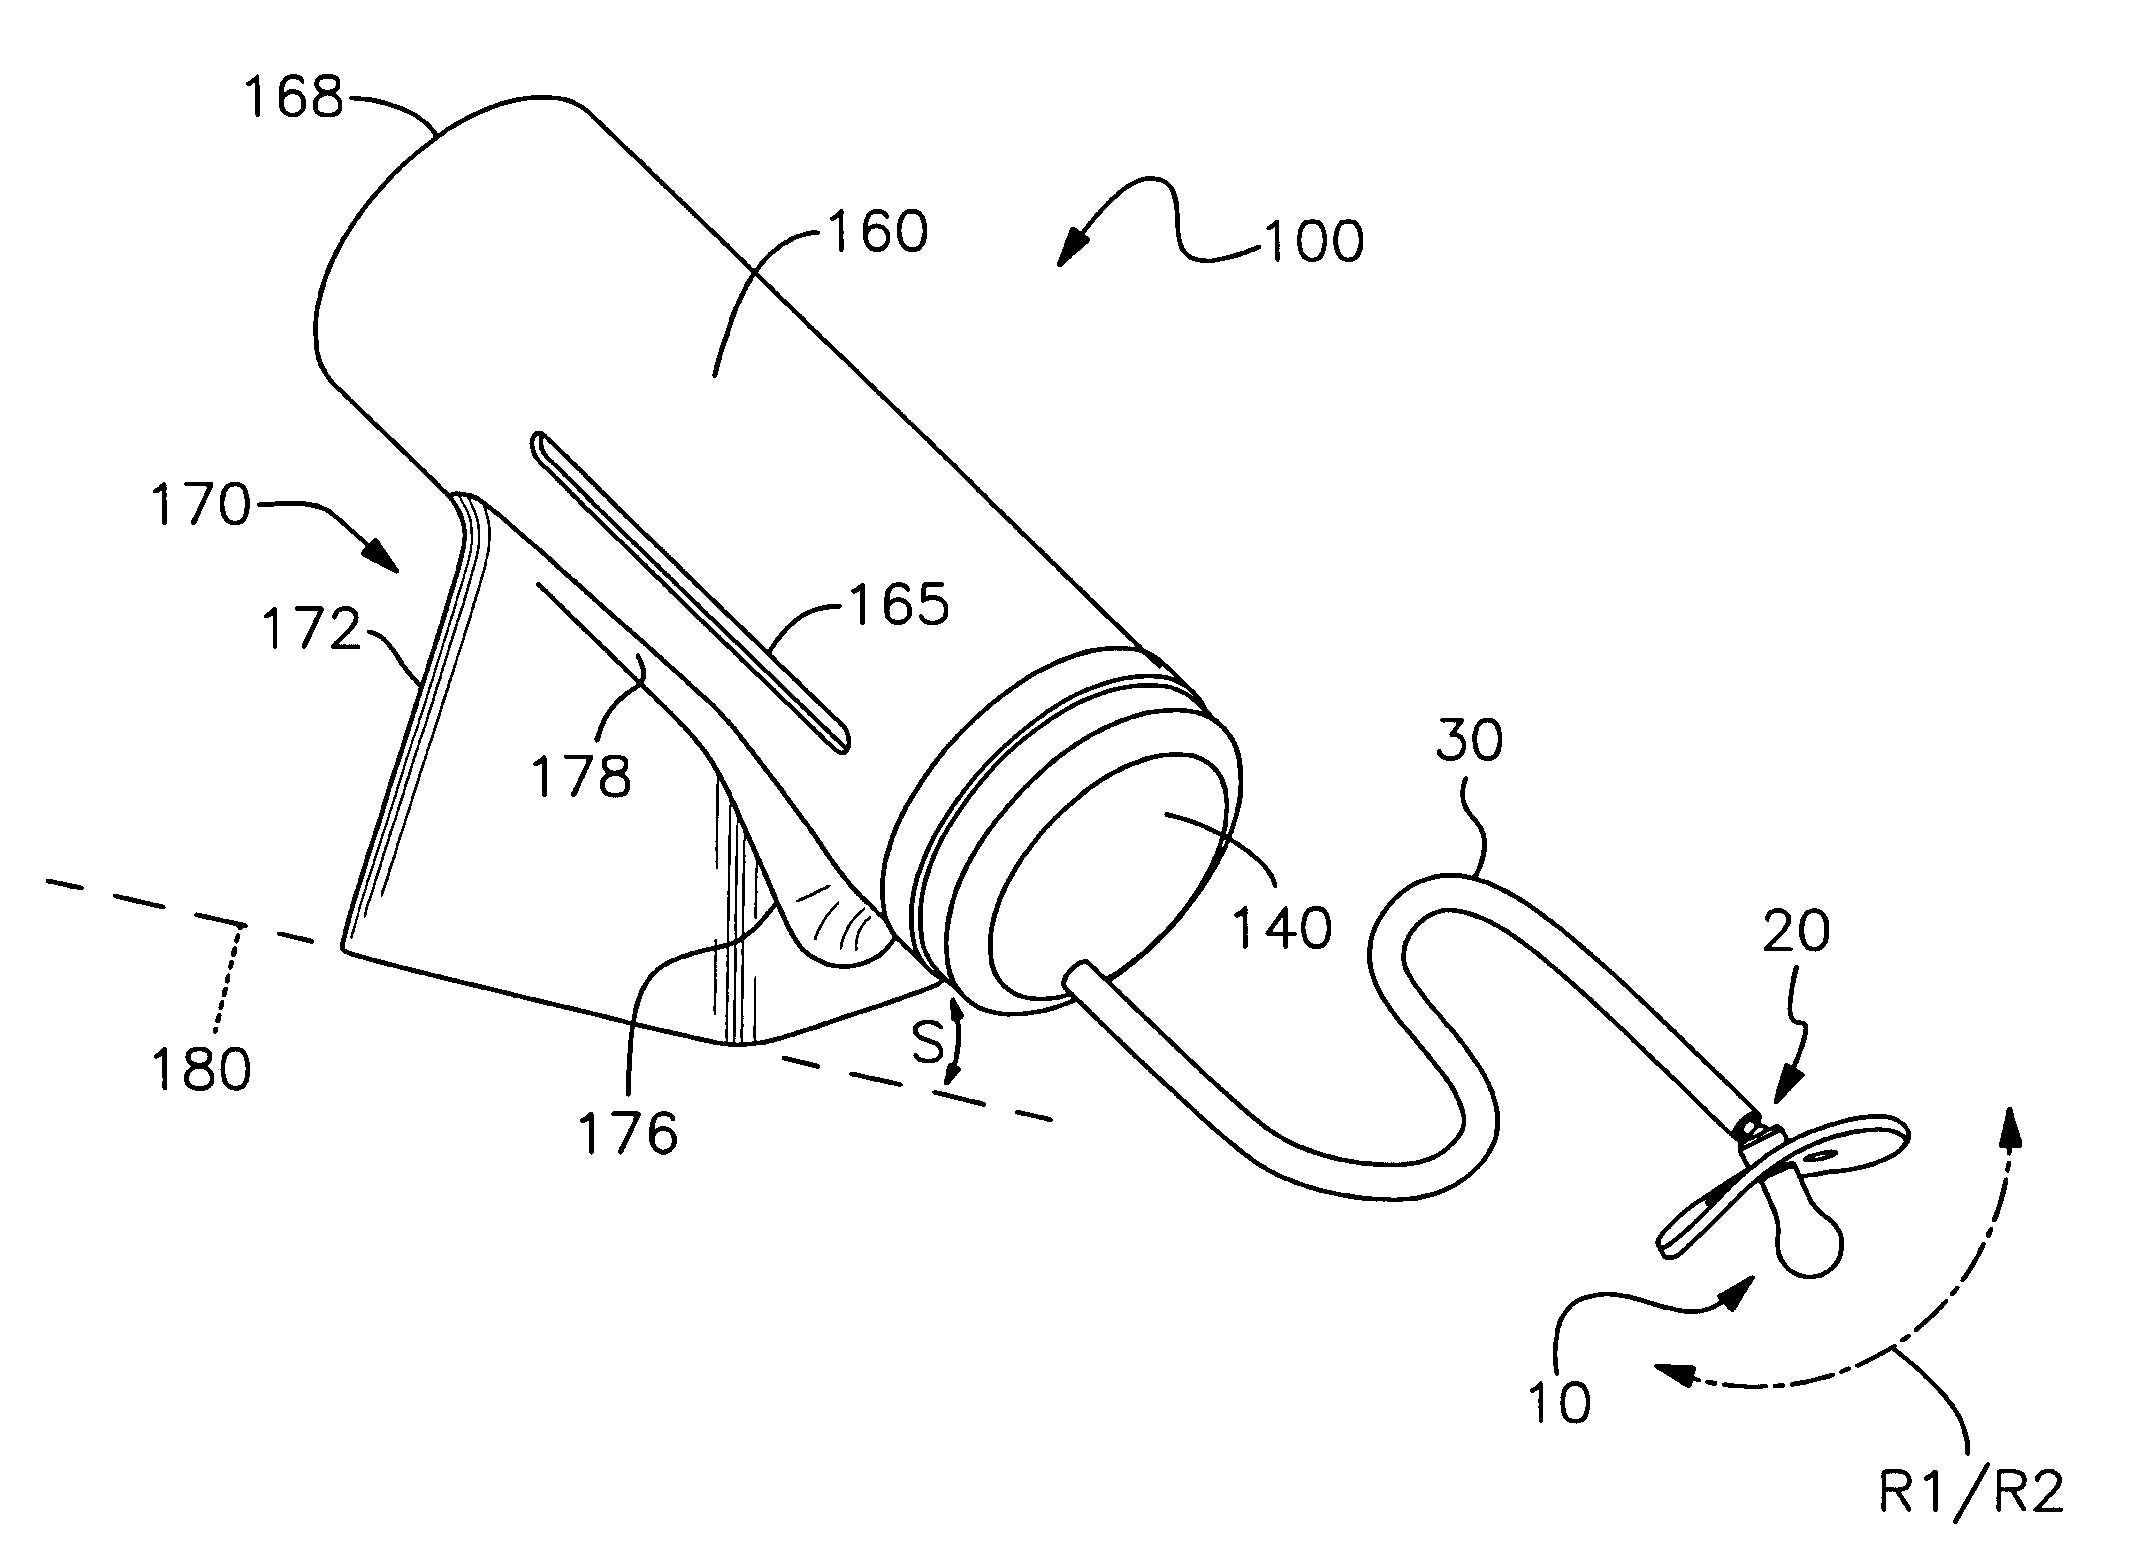 Nursing bottle with elongated tube and pivotable pacifier